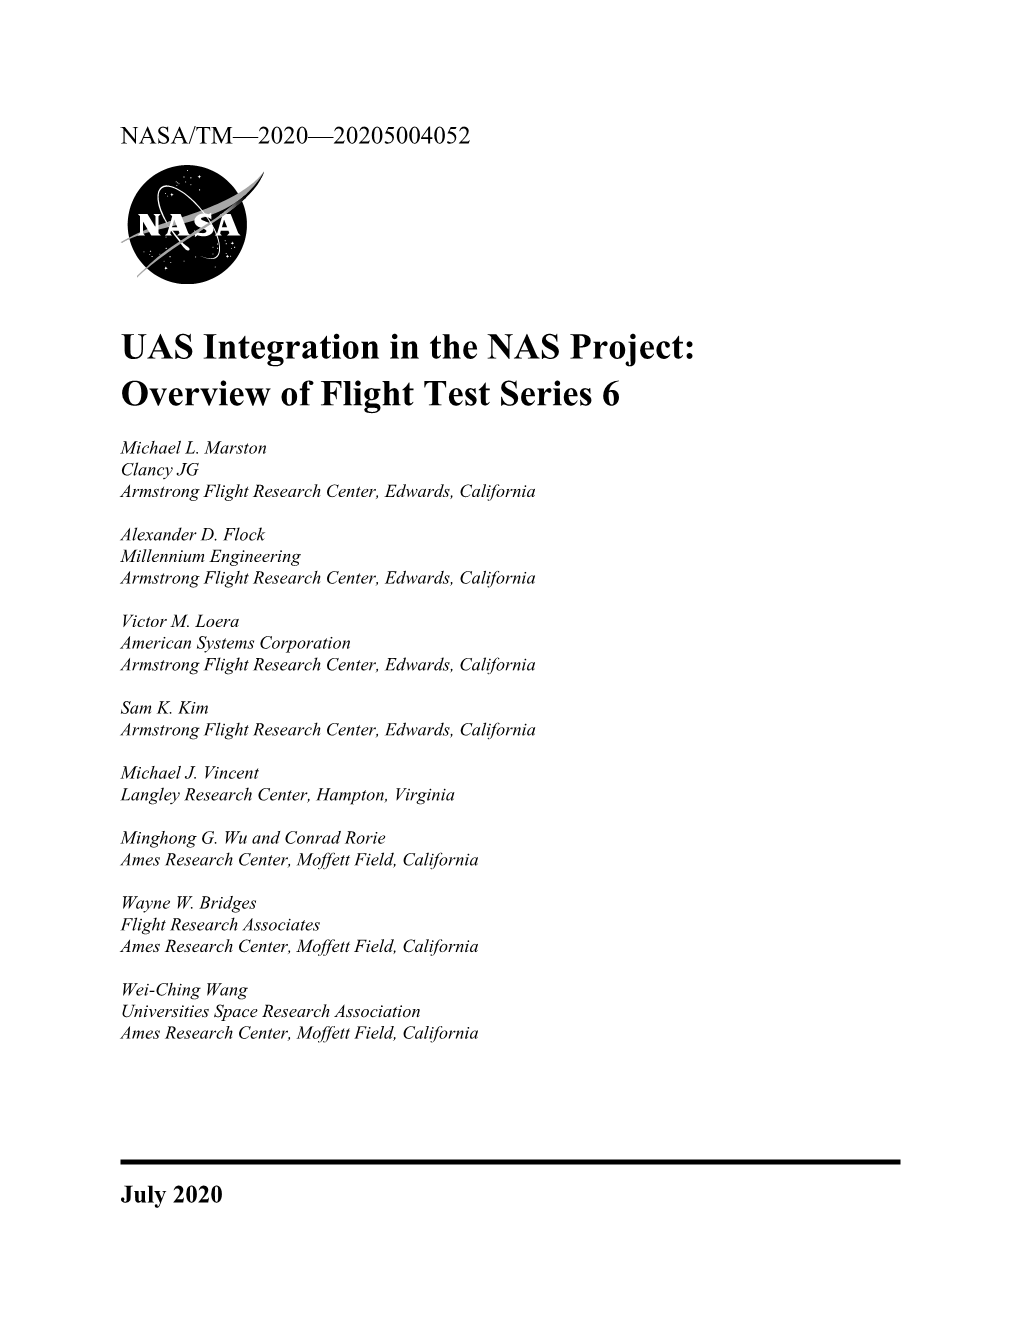 UAS Integration in the NAS Project: Overview of Flight Test Series 6